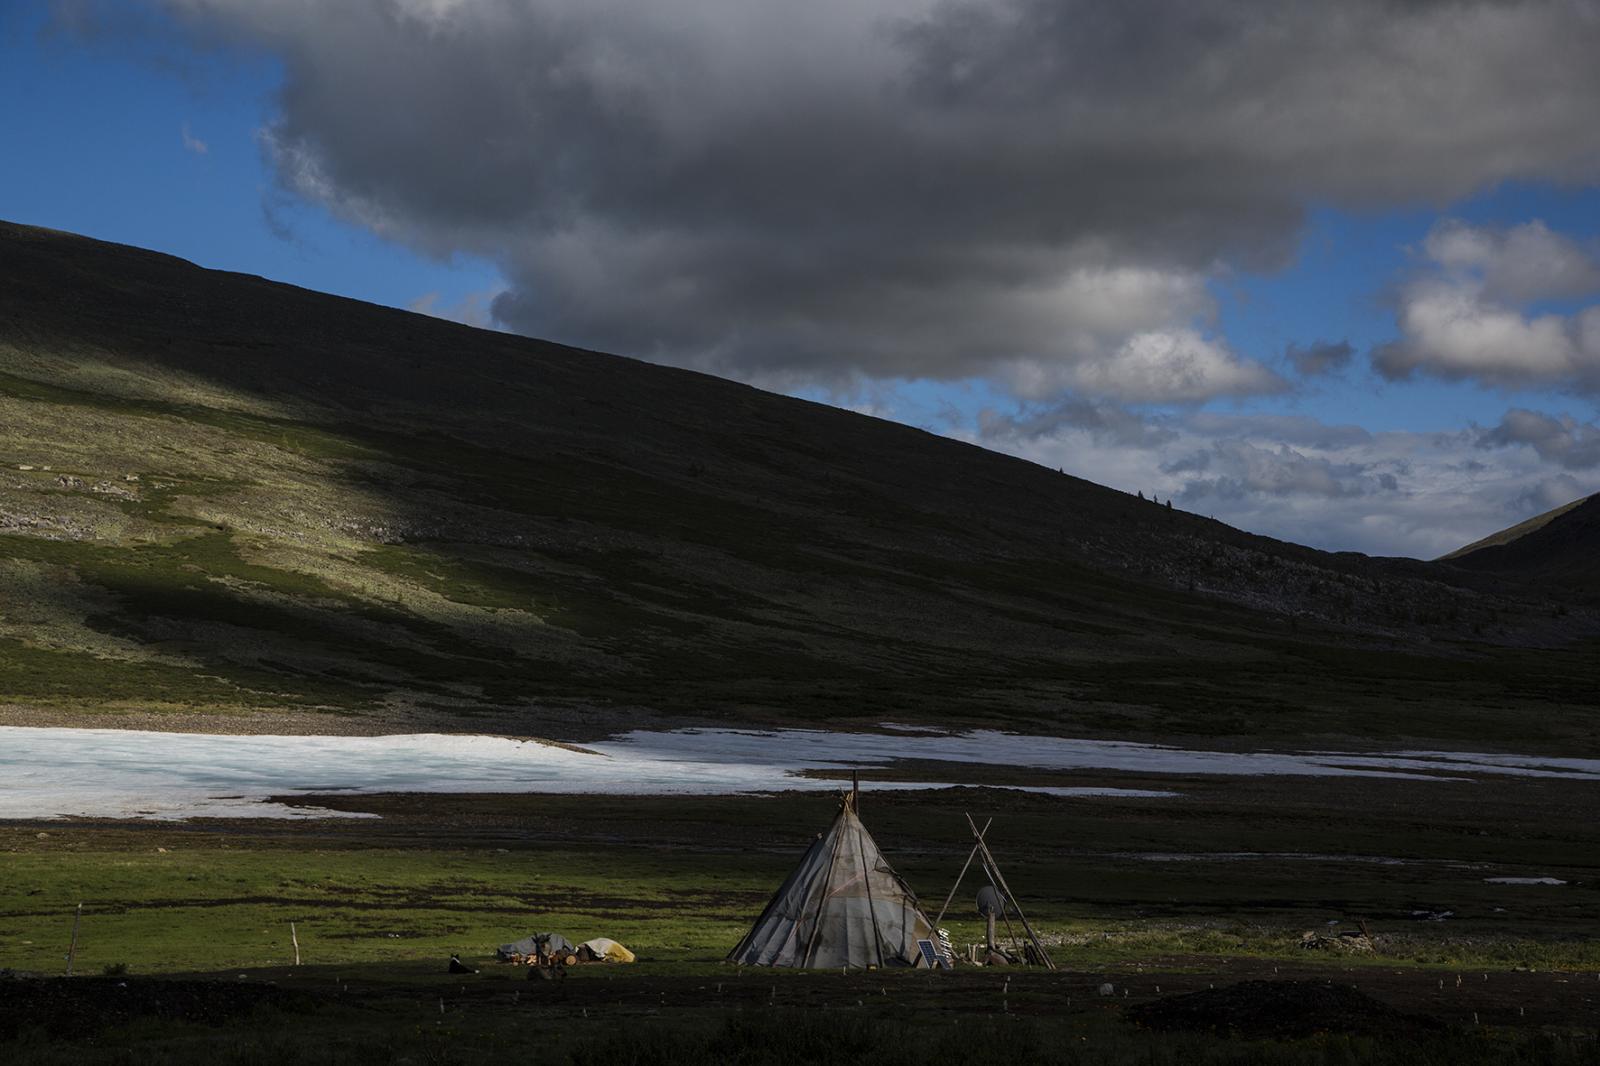  Tipi, traditional housing of t...r camp in the Mongolian Taiga. 